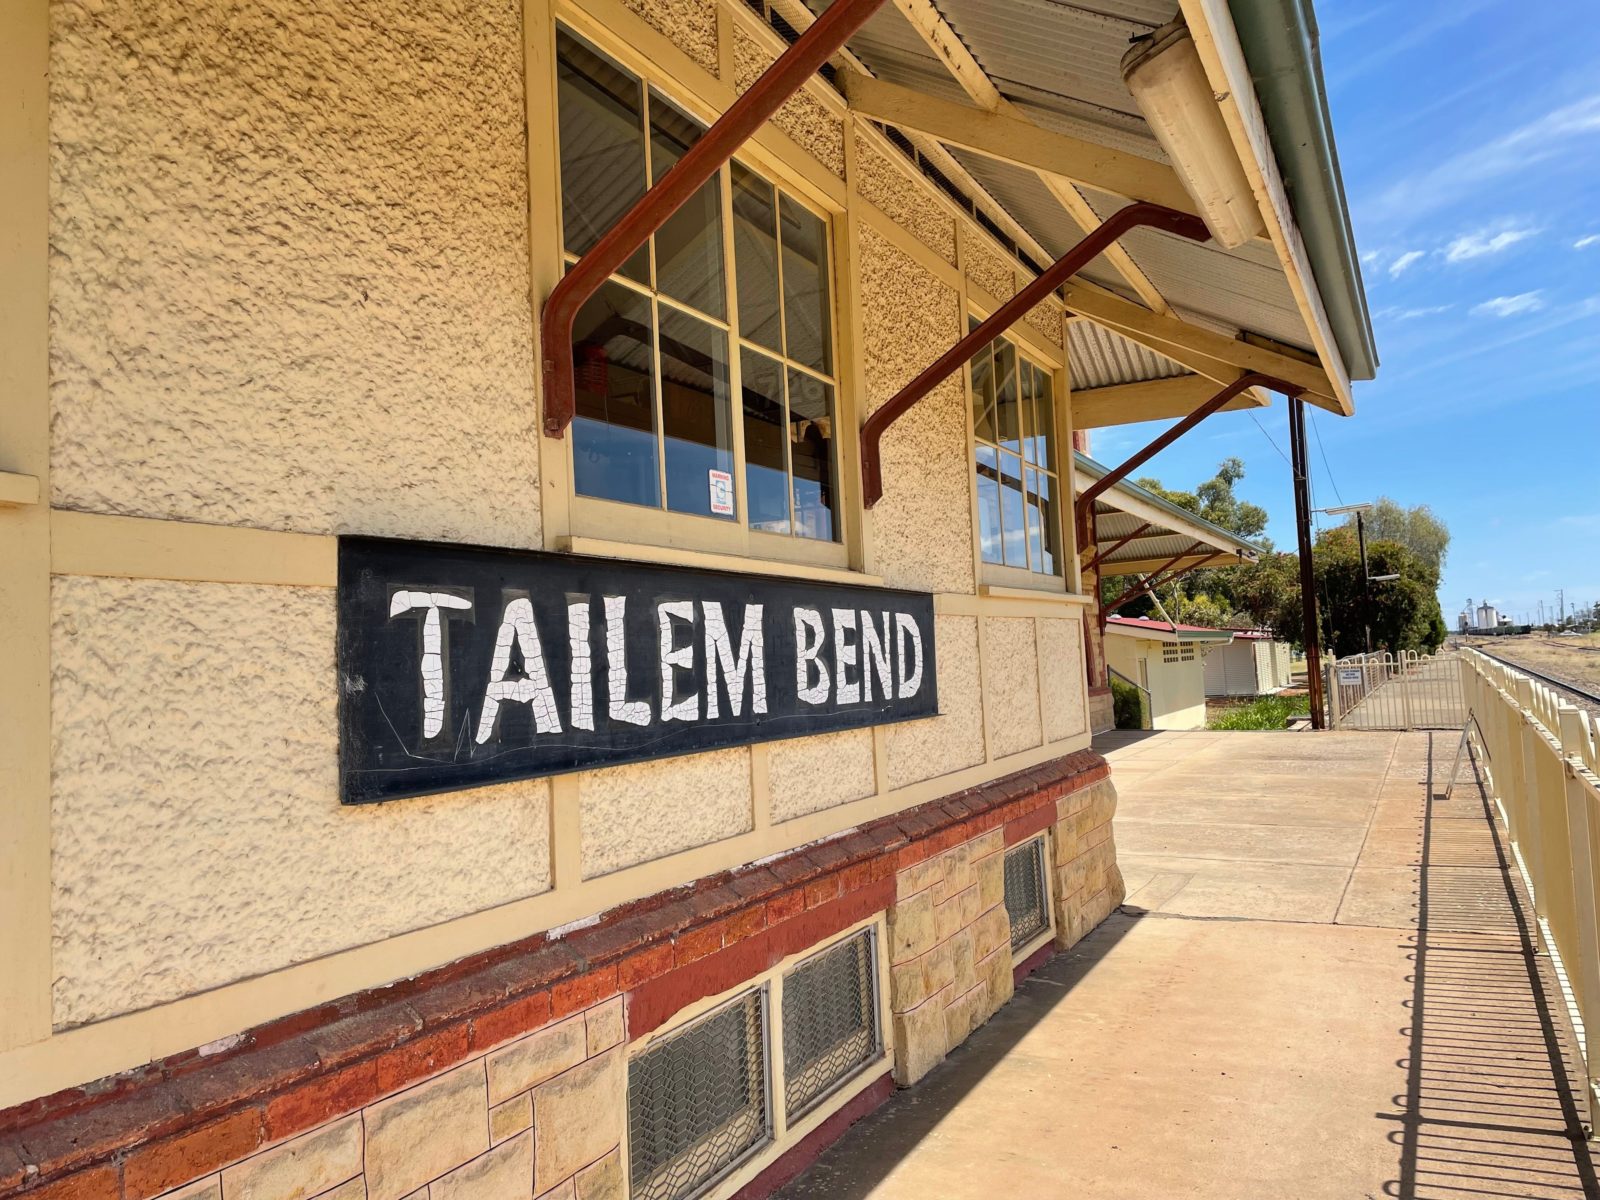 Tailem Bend Info Station And Rail 631e8030bf38aee64f59002b Scaled 